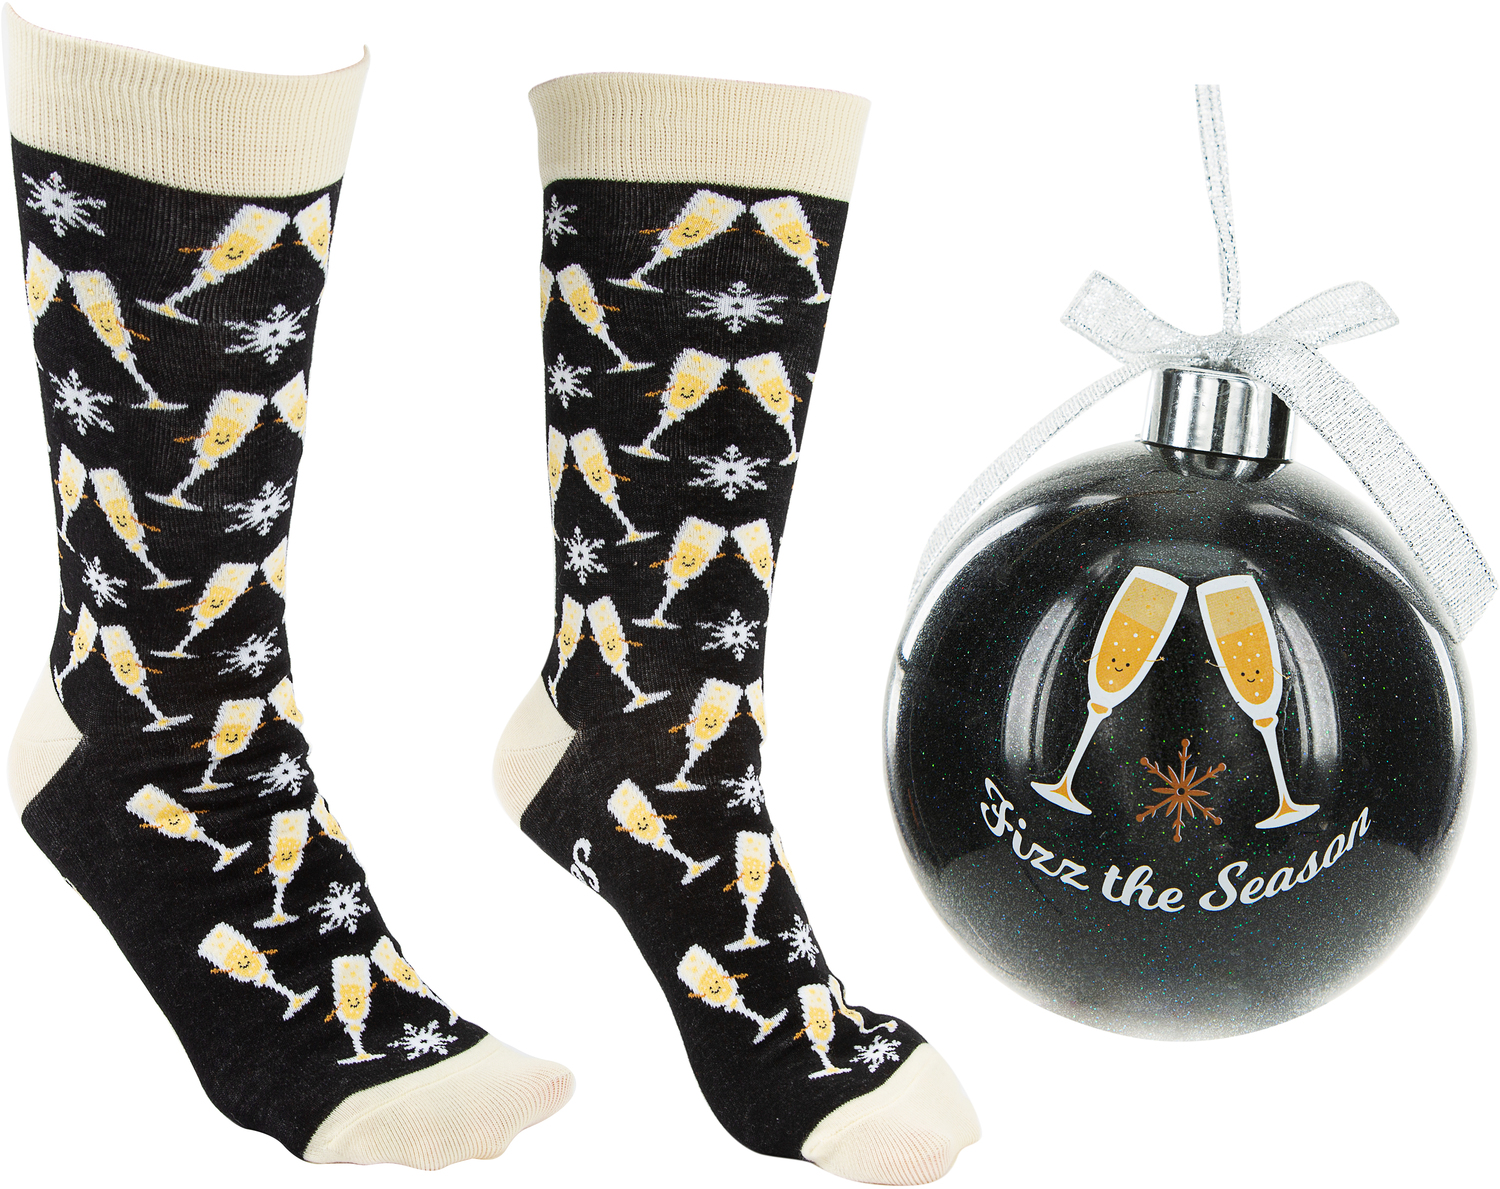 Fizz the Season by Late Night Last Call - Fizz the Season - 4" Ornament  with Unisex Holiday Socks